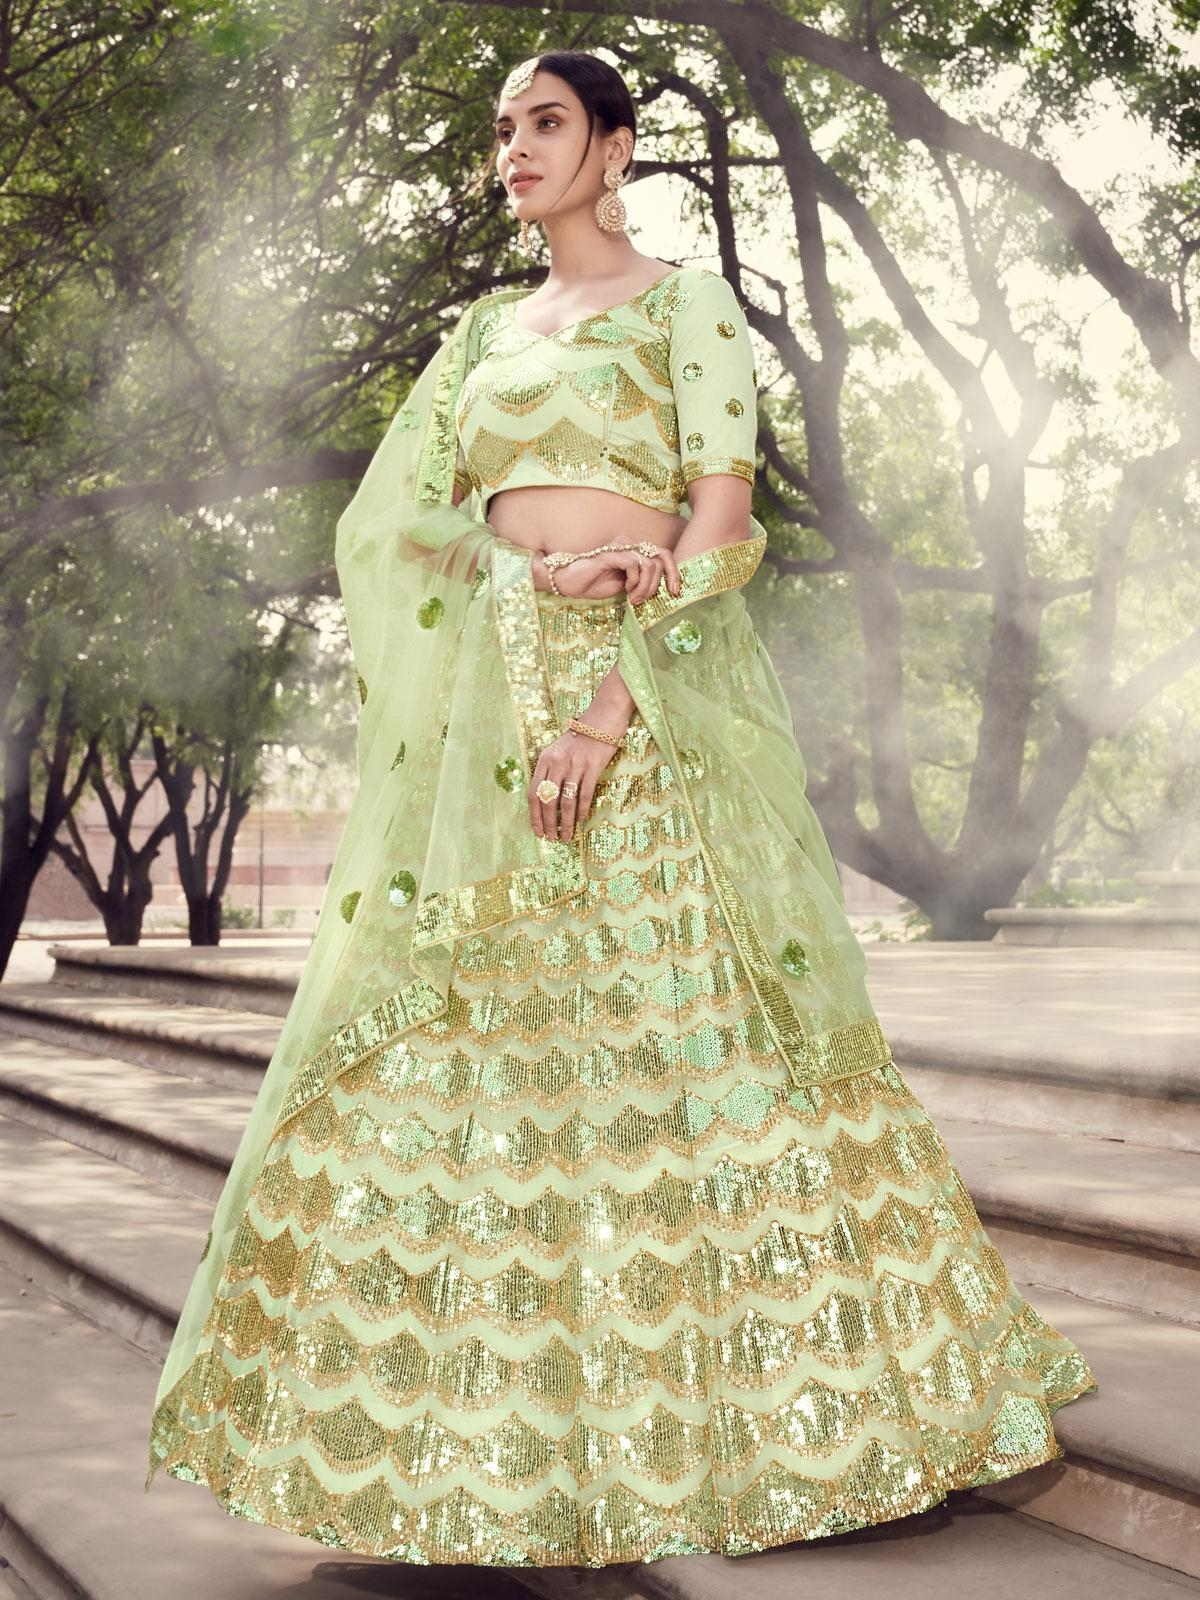 Check Out These Latest Green Lehenga Designs for Your Wedding!